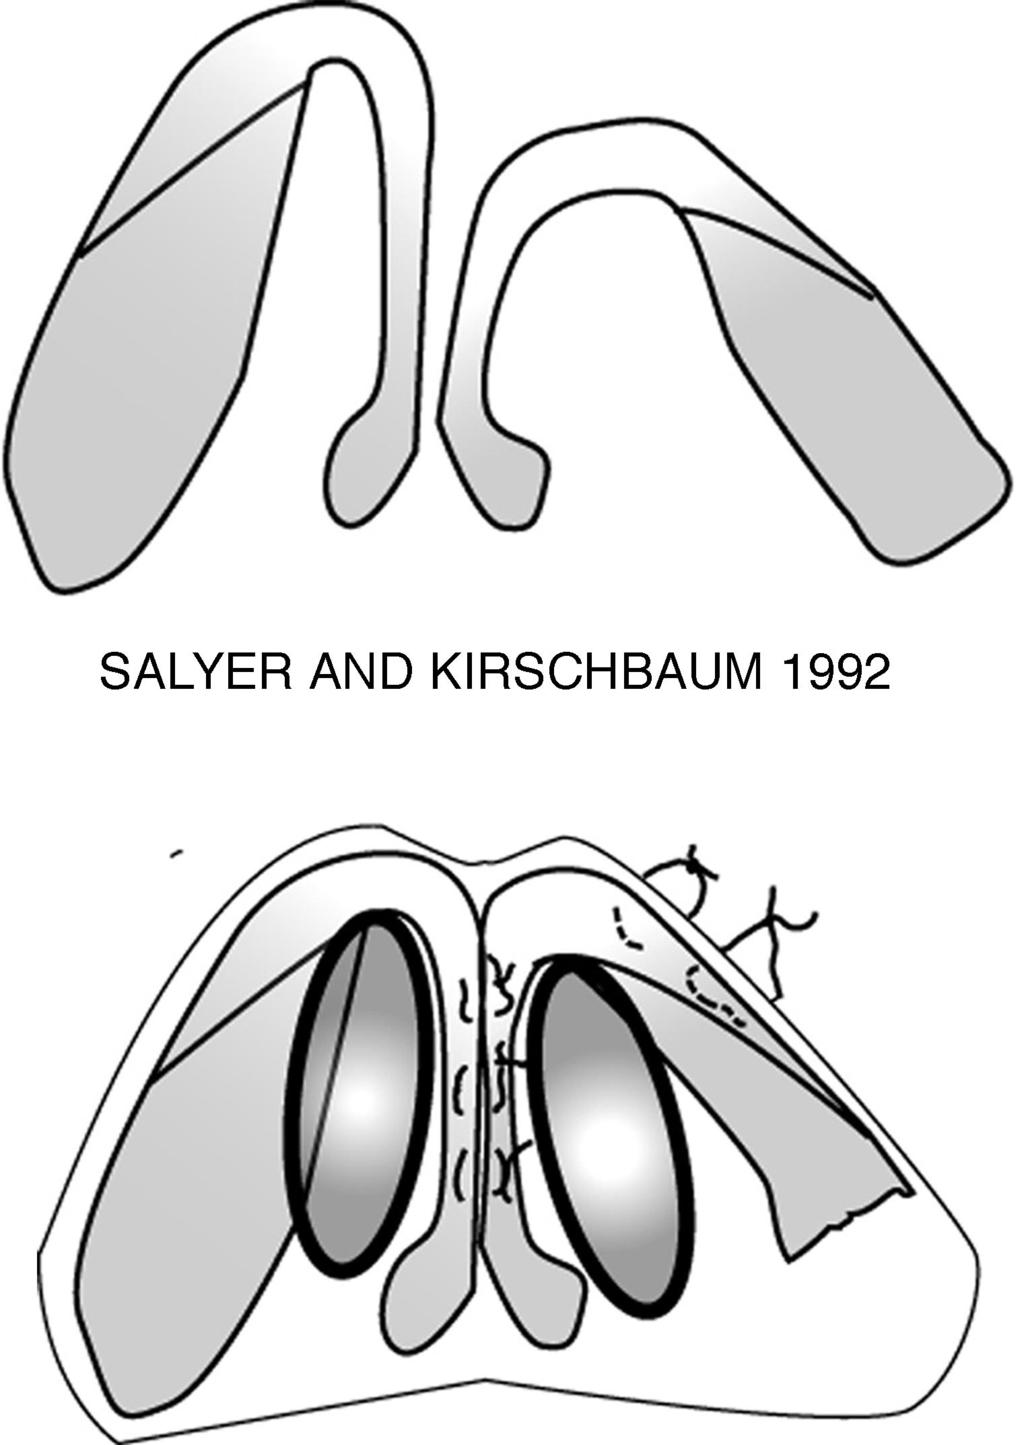 Vol. 114, No. 4 / CLEFT RHINOPLASTY FIG. 23. Salyer and Kirschbaum both advocated early intervention with alteration of lower lateral cartilage position.